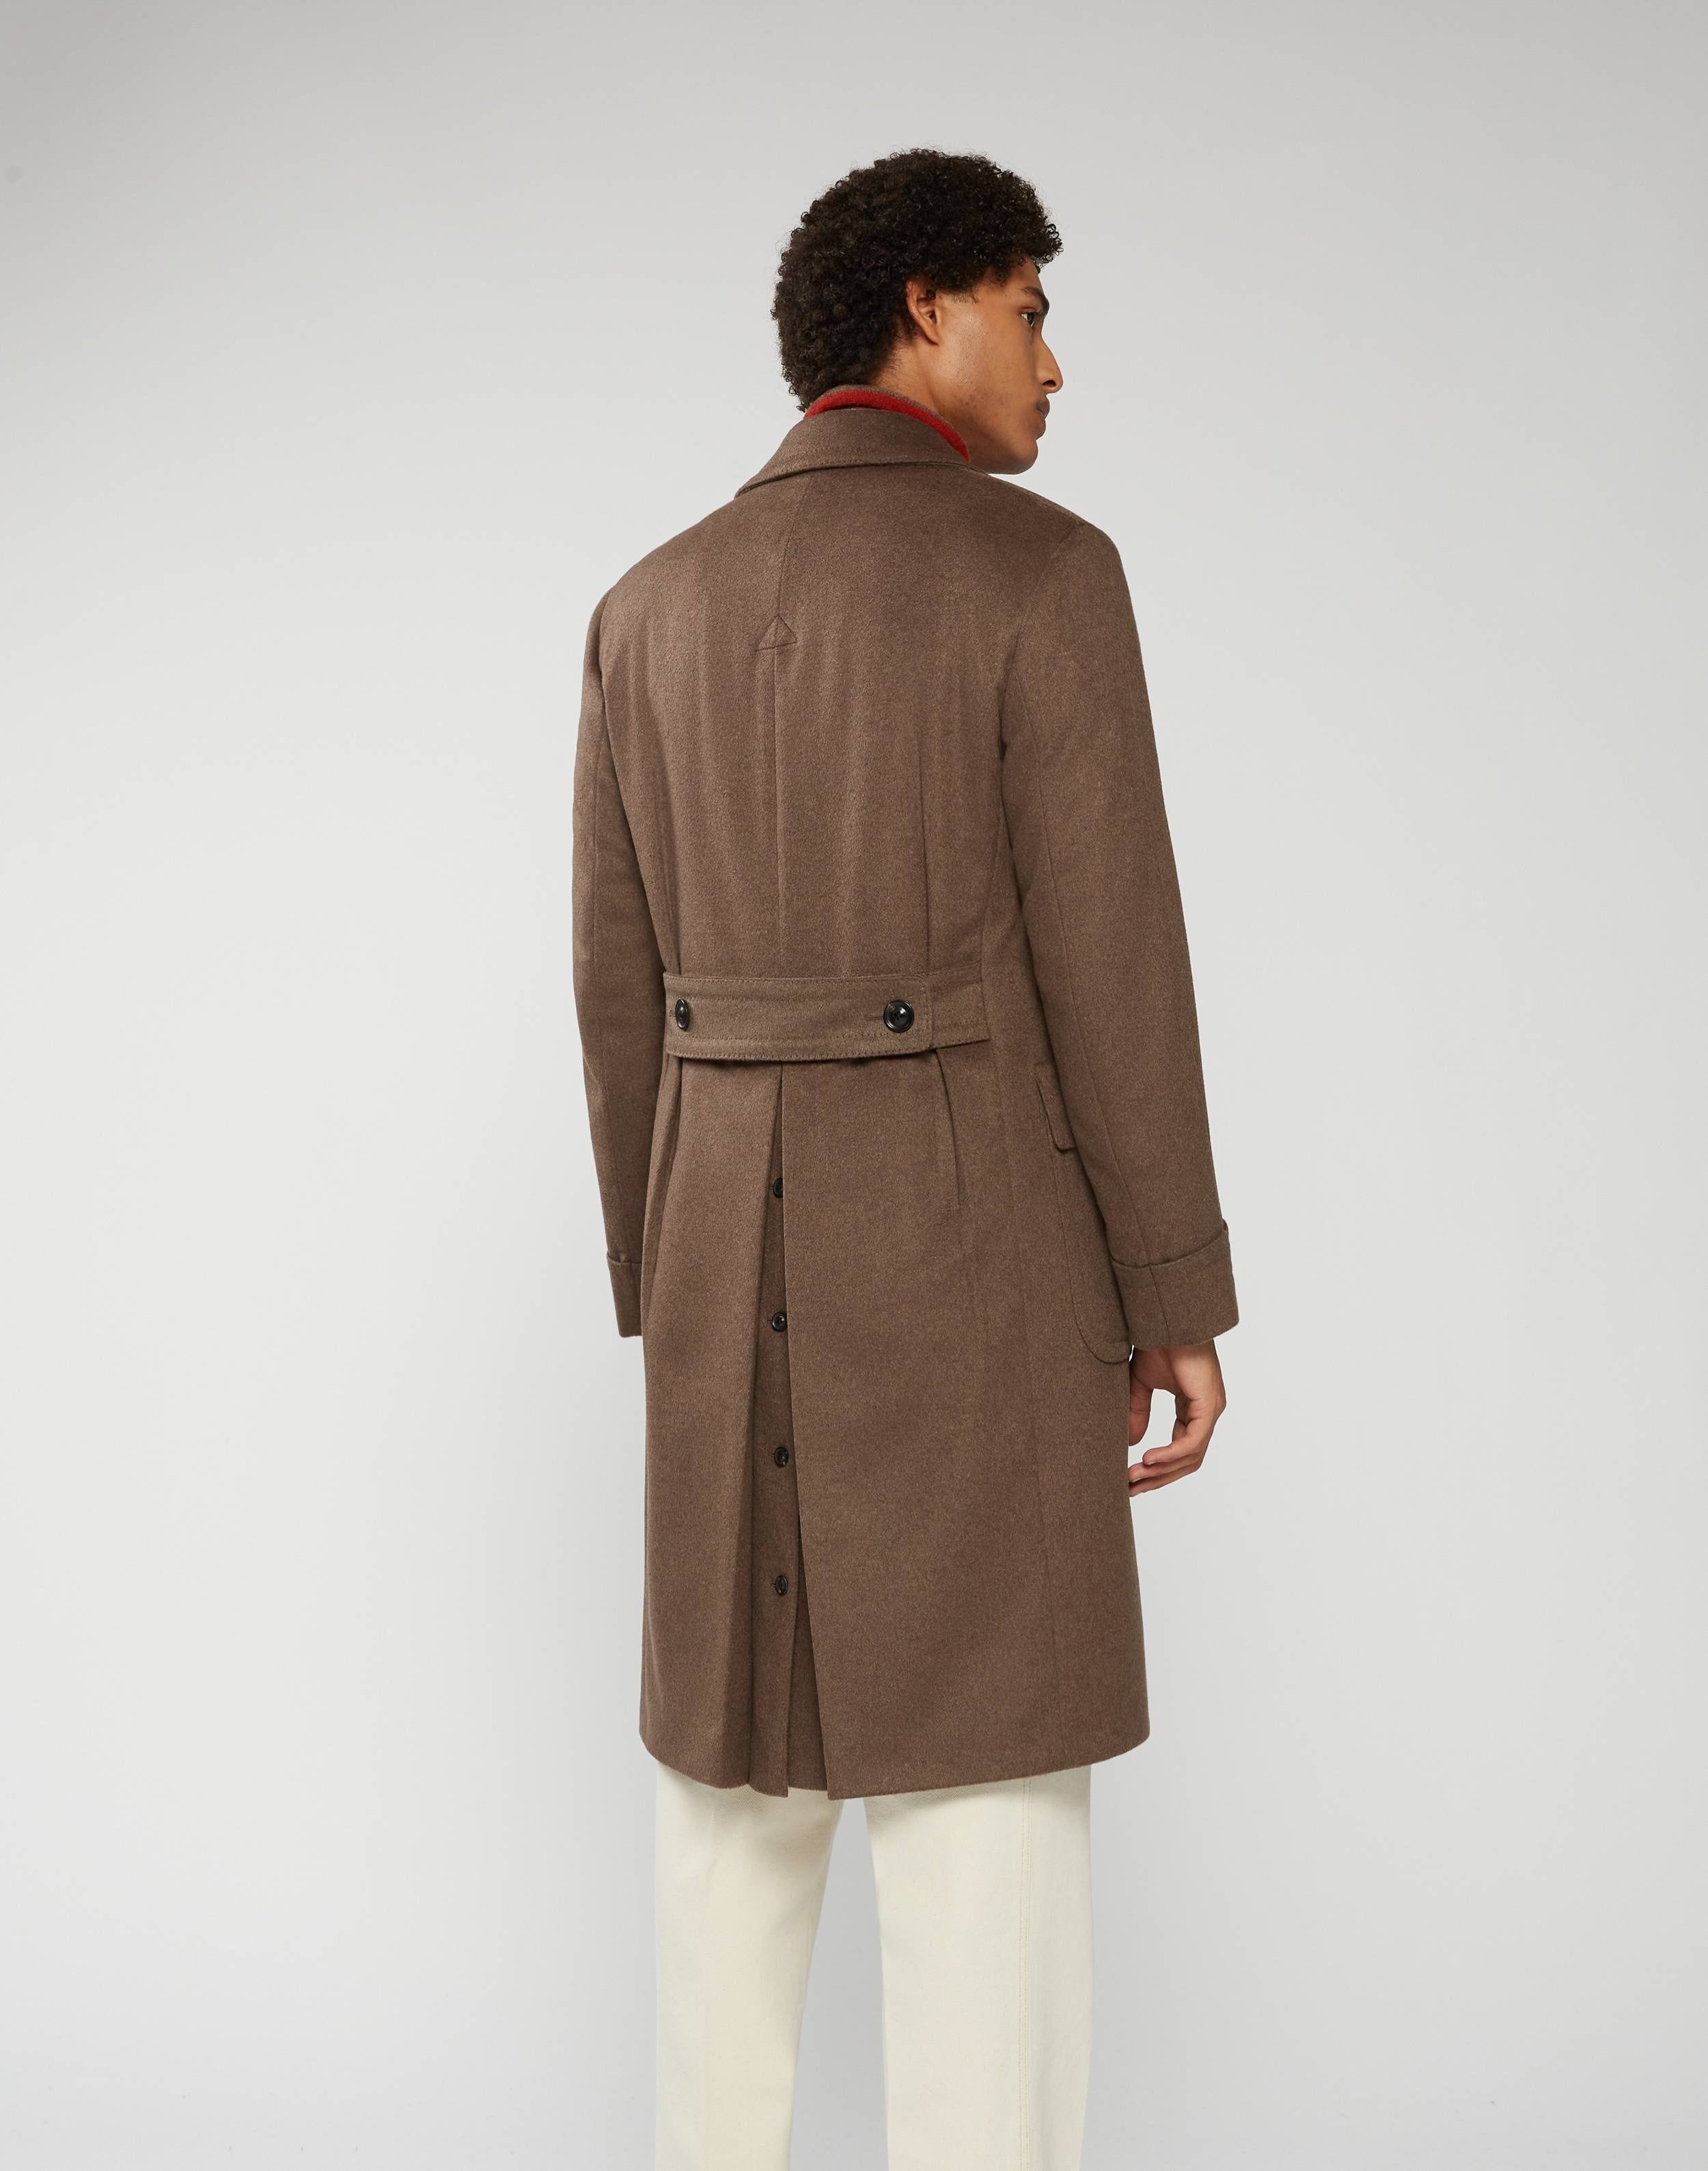 Double-breasted Ulster coat in brown beaver-effect cashmere